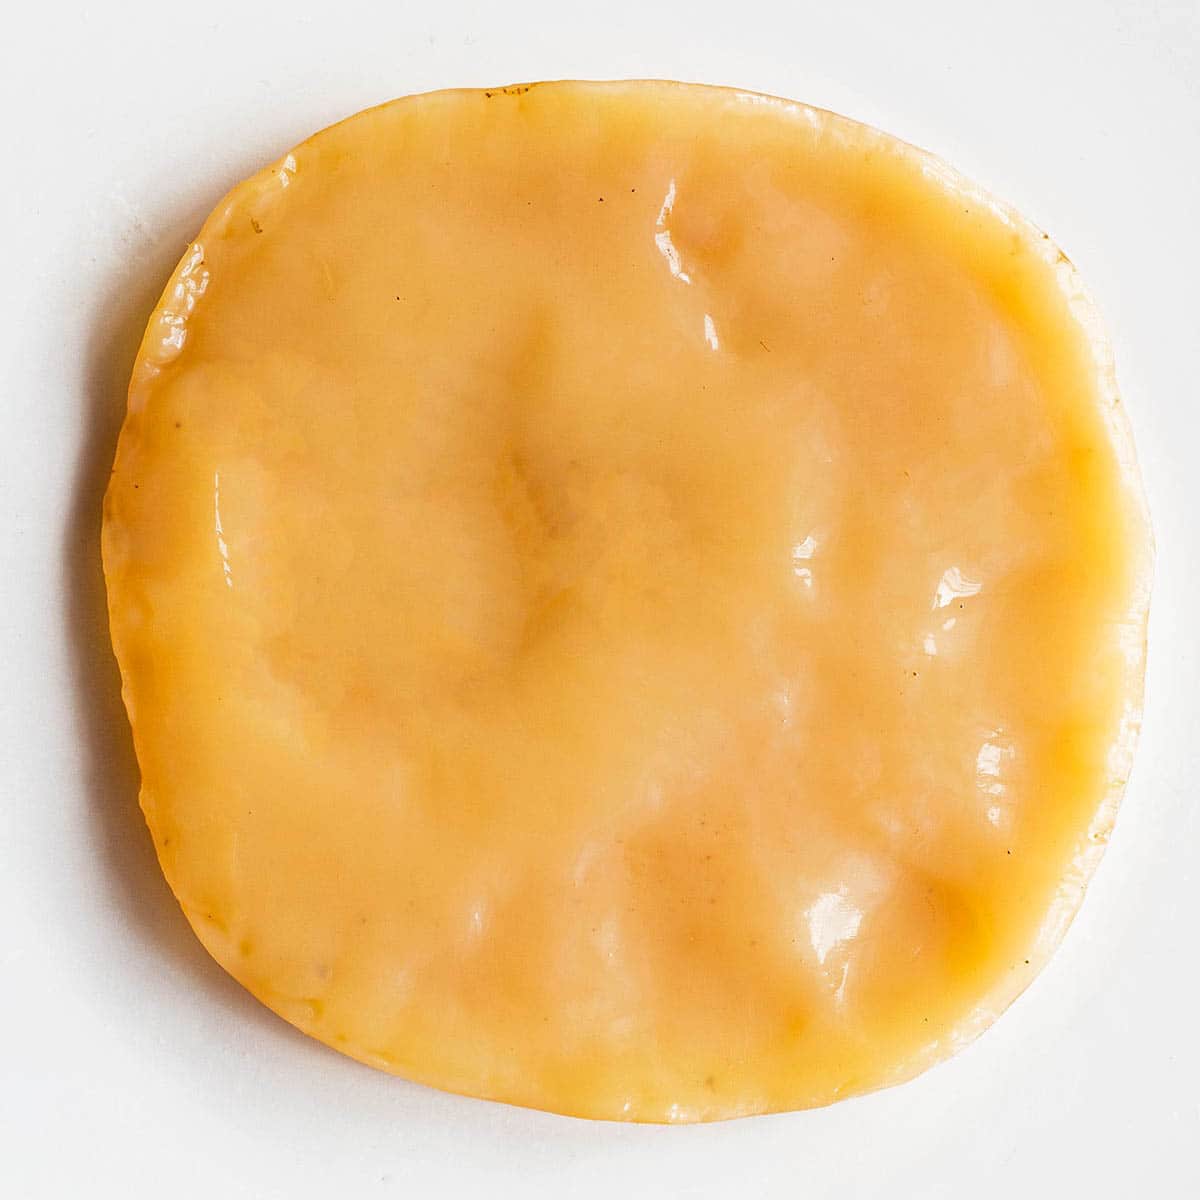 How To Make Your Own Kombucha Scoby (Step-by-Step Recipe)